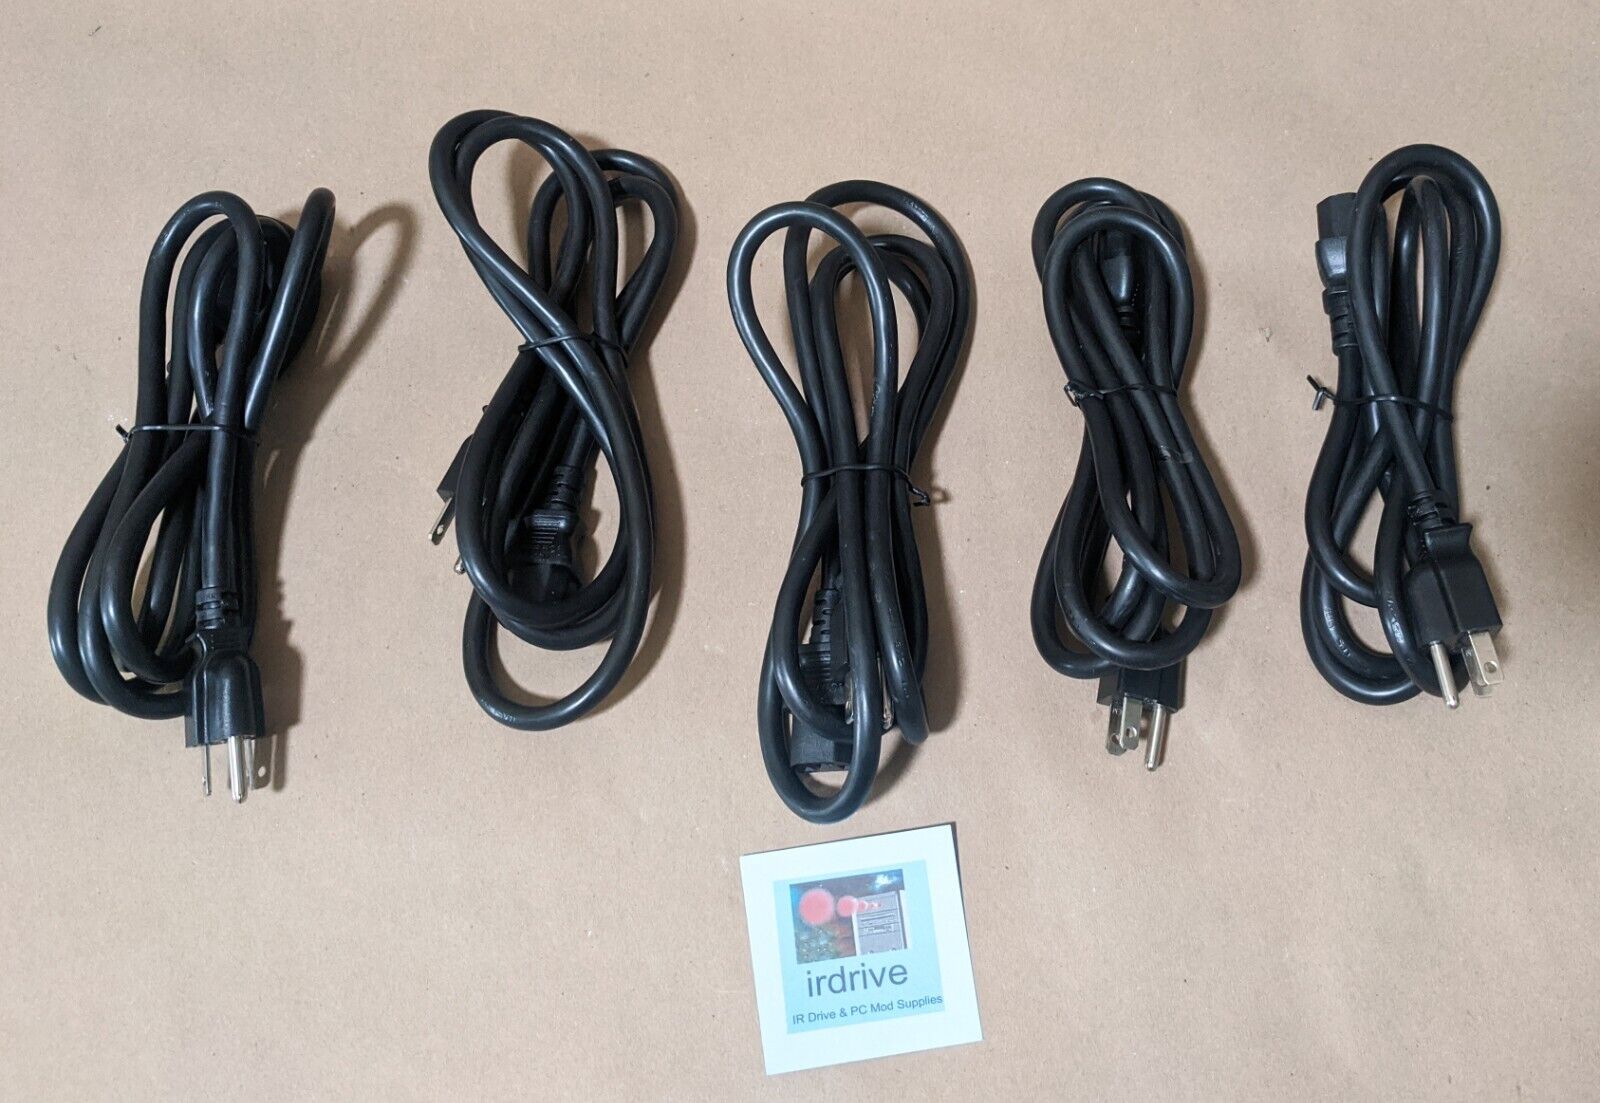 Lot 5-pcs: 3-Prong US Heavy Duty UL Thick 16-AWG Desktop PC AC Power Cord Cable